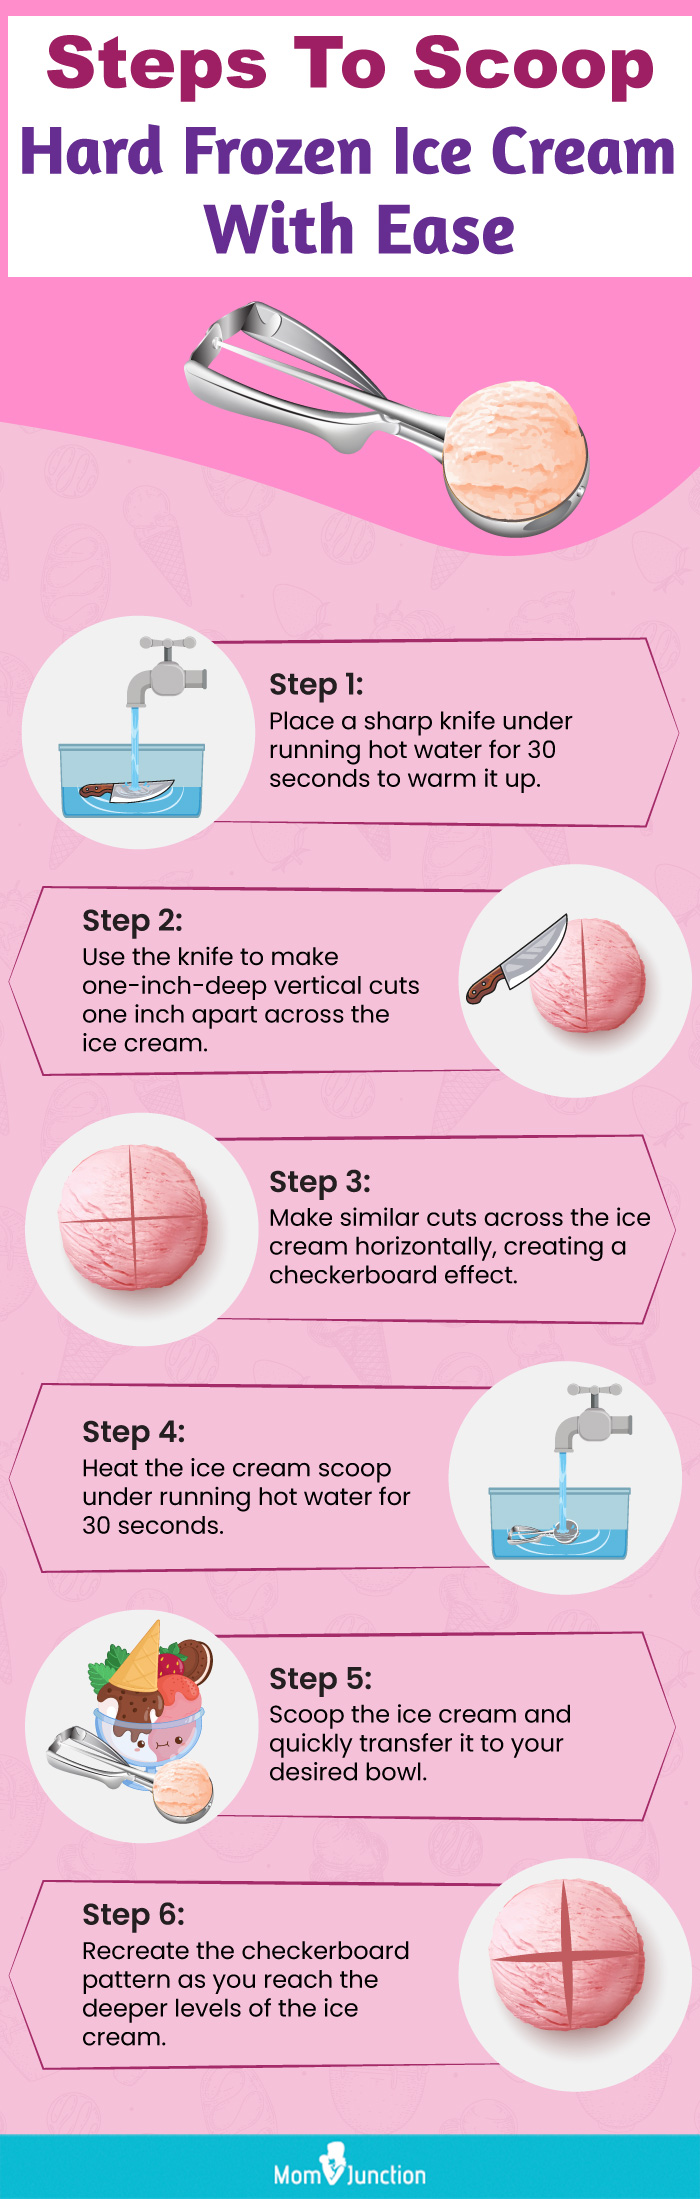 Steps To Scoop Hard Frozen Ice Cream With Ease (infographic)